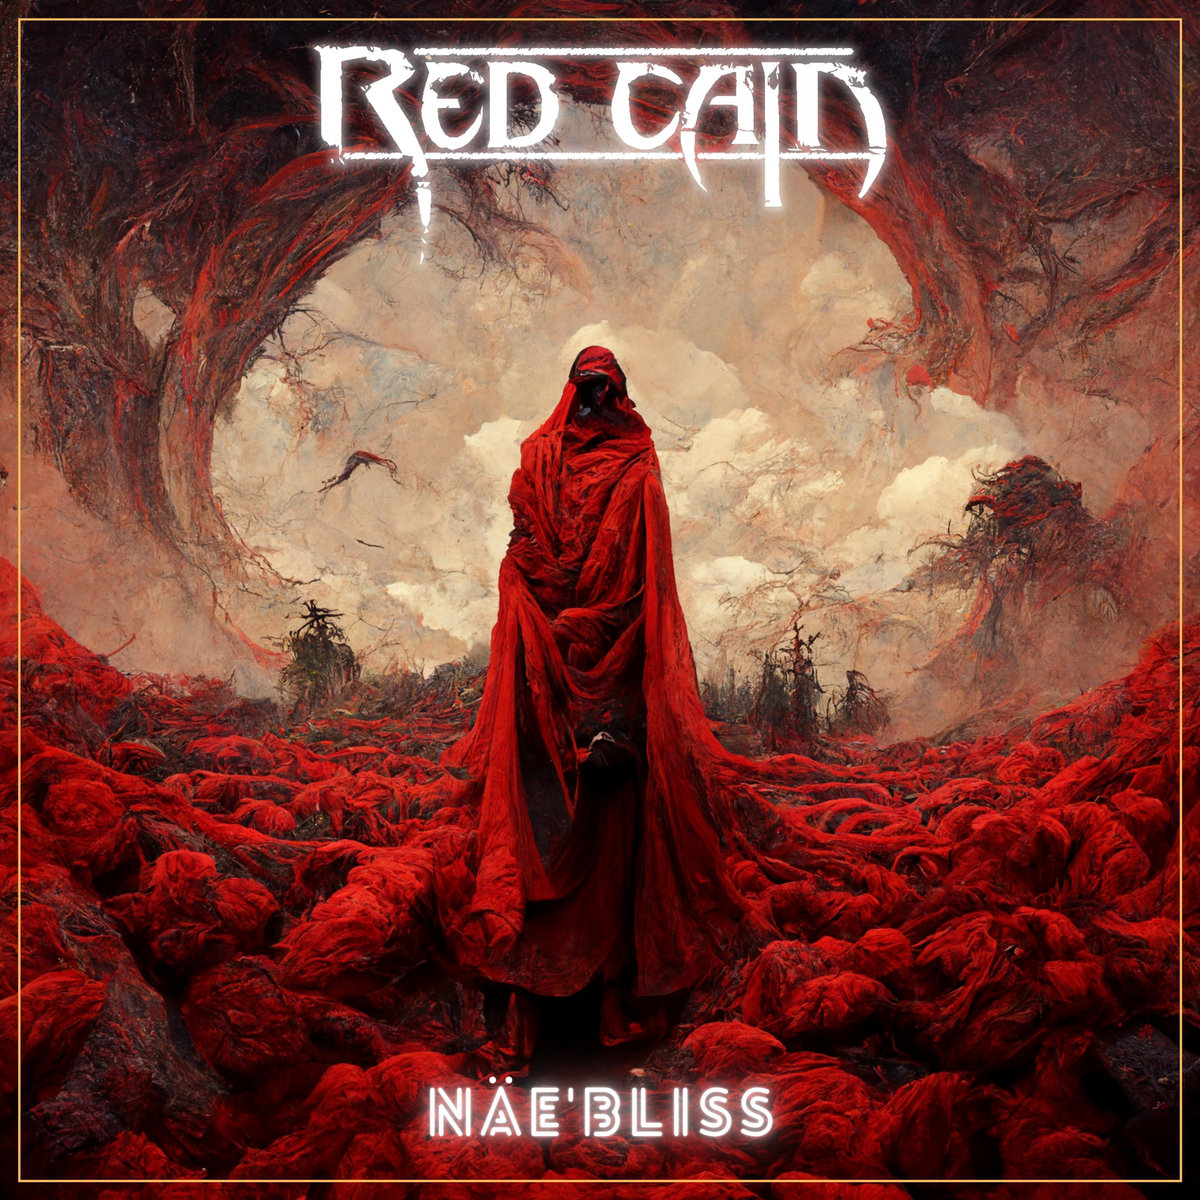 ALBUM REVIEW: Näe’bliss by Red Cain